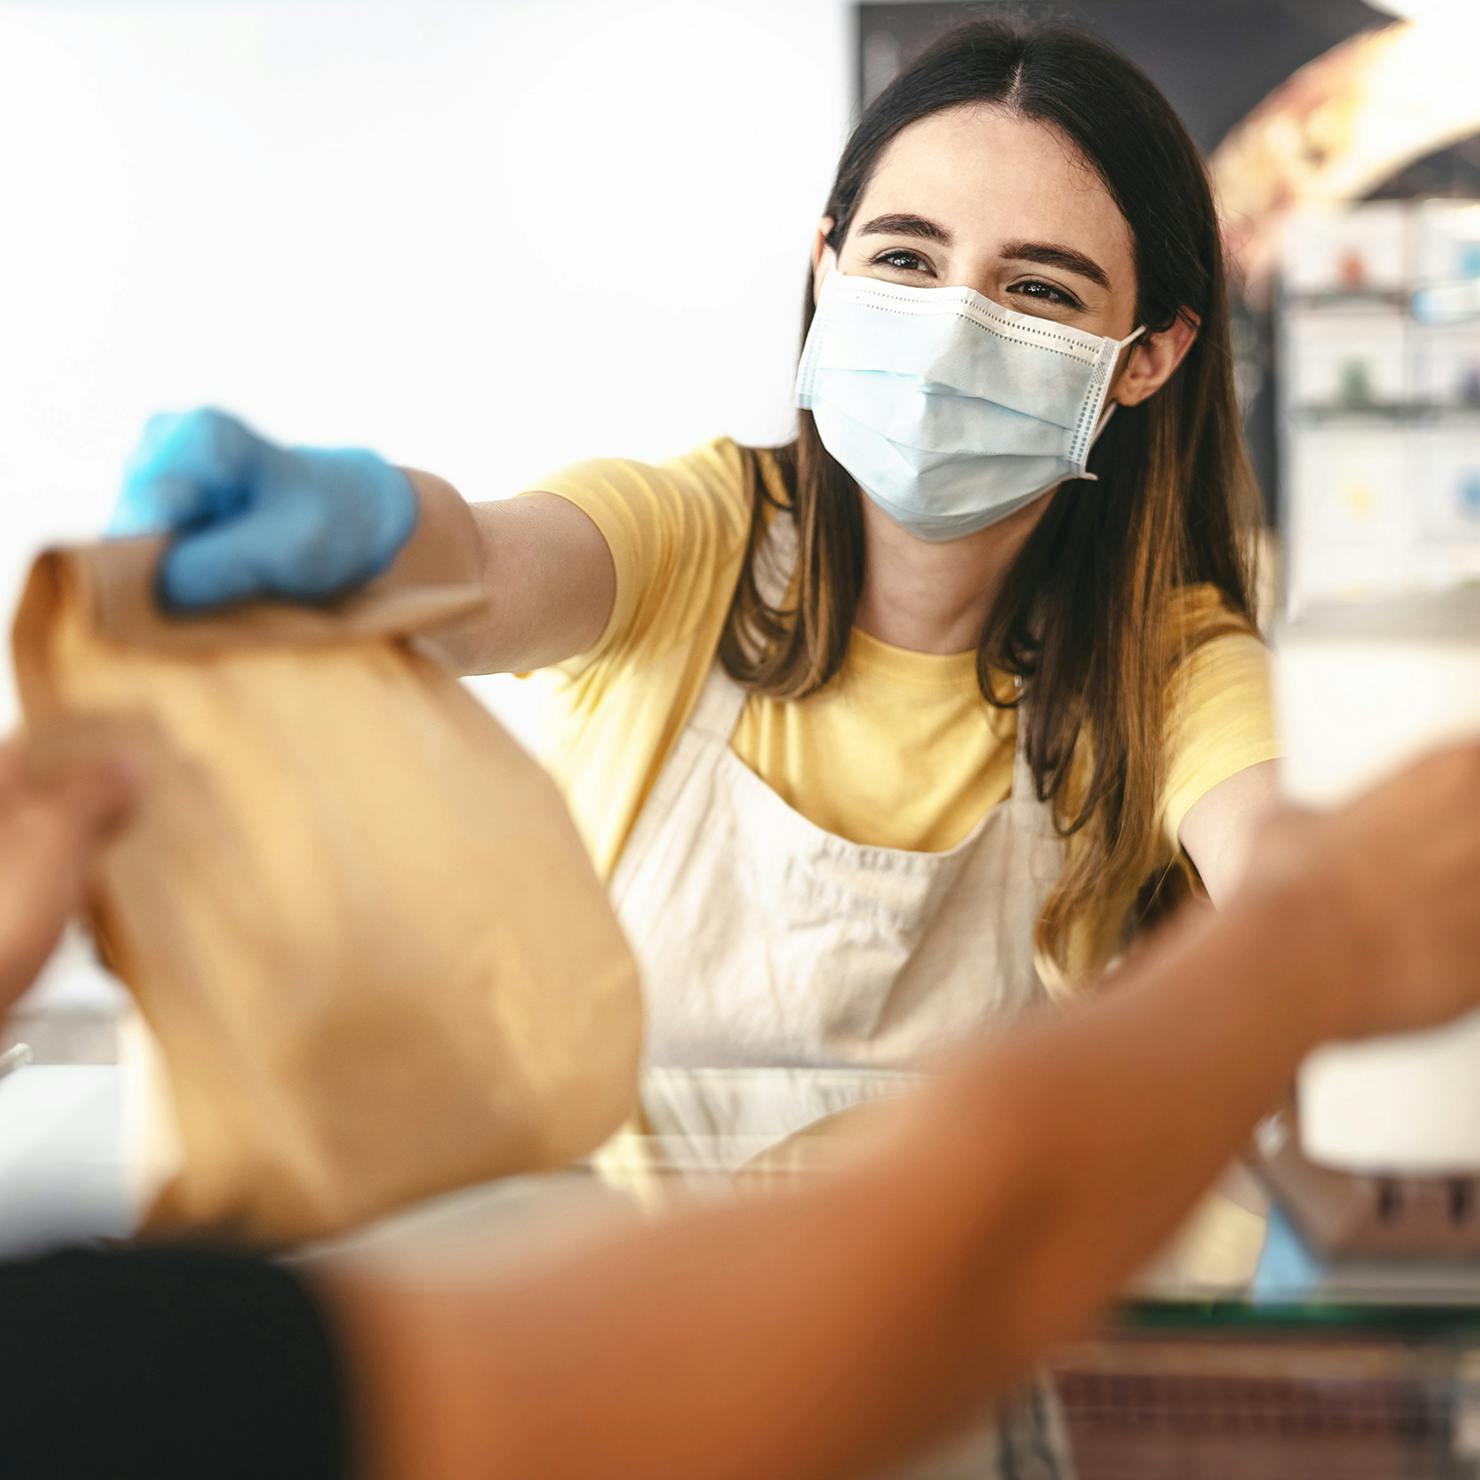 Woman wearing mask and gloves, handing a bag of food to customer.